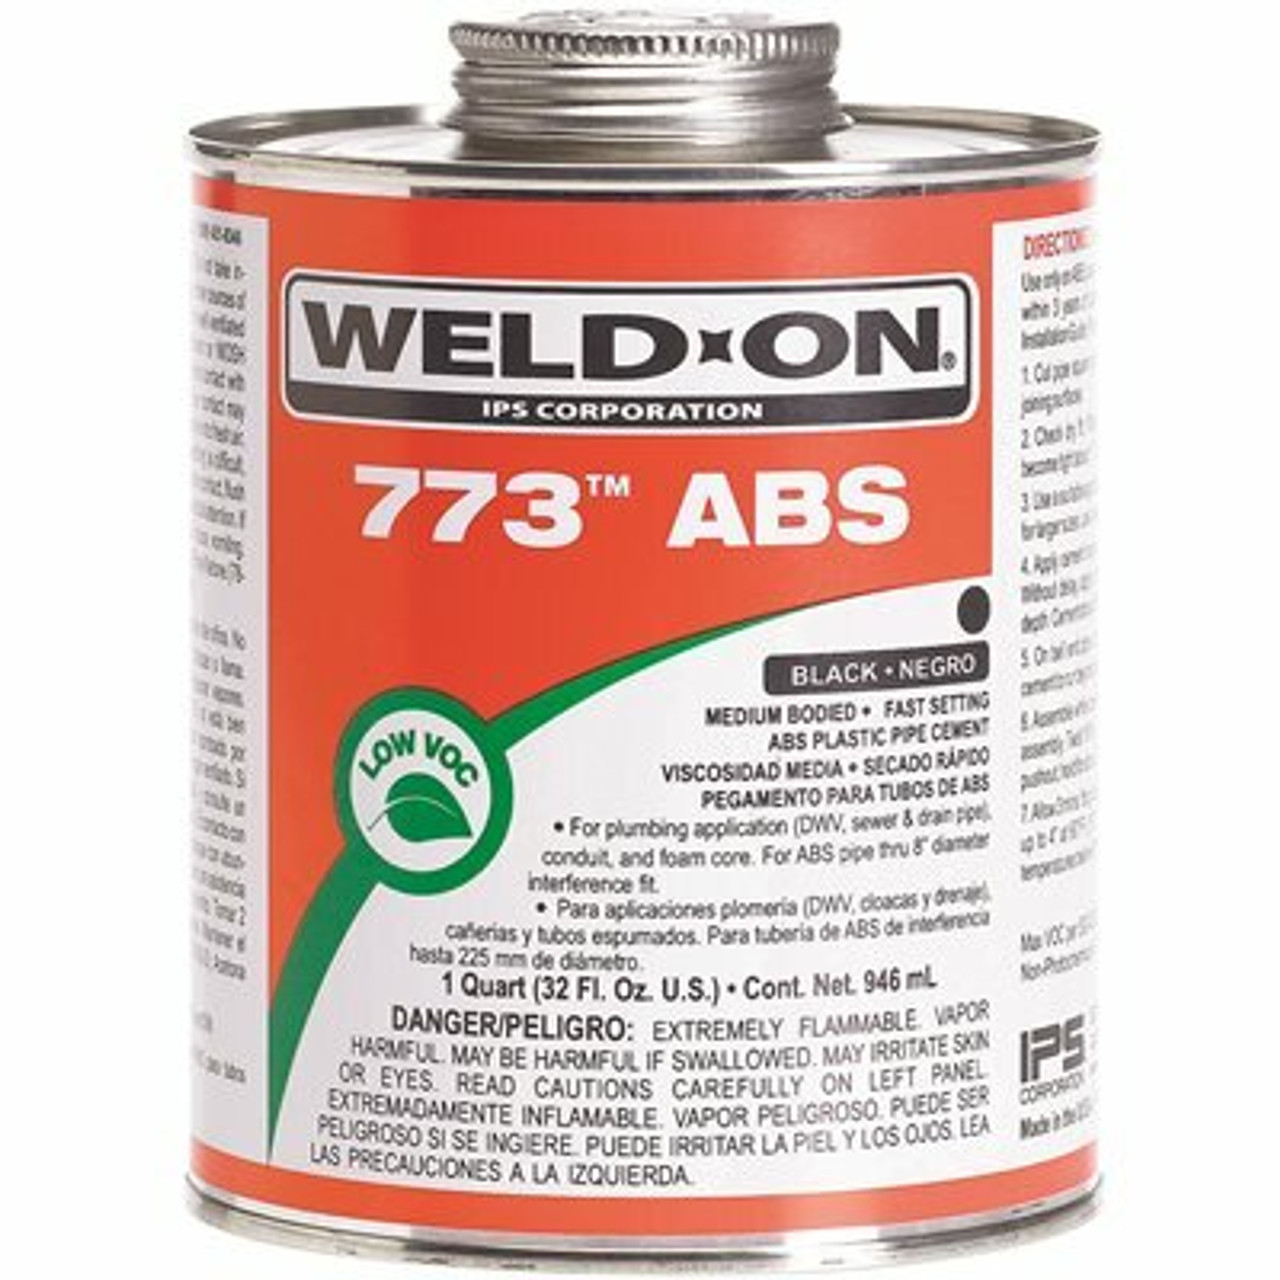 Weld-On Weld-On 773 Abs Solvent Cement, Black, Low Voc, High Strength, Medium Bodied, Fast Setting, 1 Pint (16 Fl. Oz.)